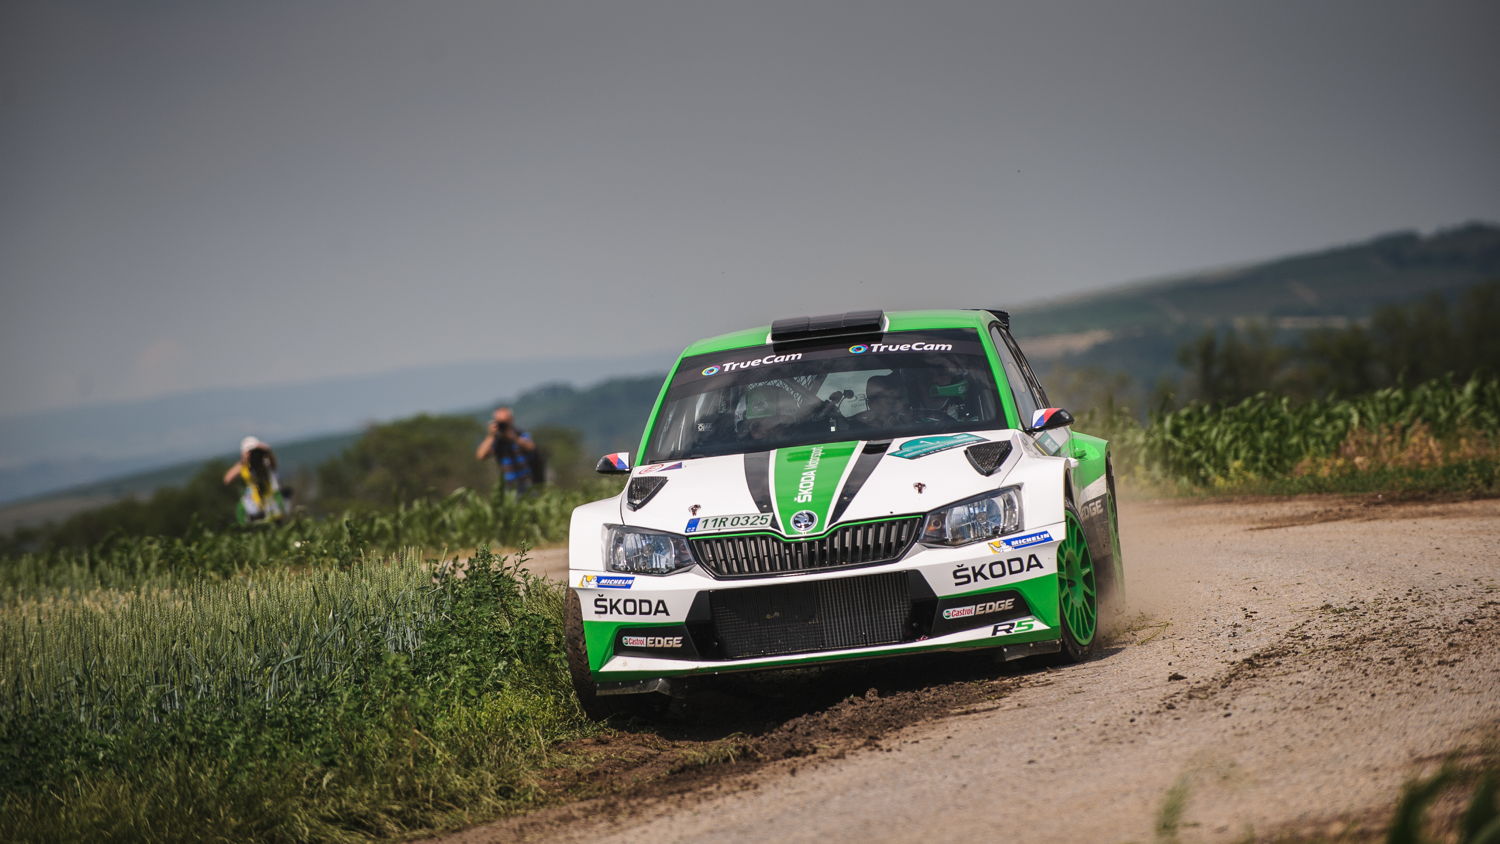 At Rally Bohemia Jan Kopecký and Pavel Dresler (CZE/CZE), driving a ŠKODA FABIA R5, chase their fifth win in a row in the Czech Rally Championship.